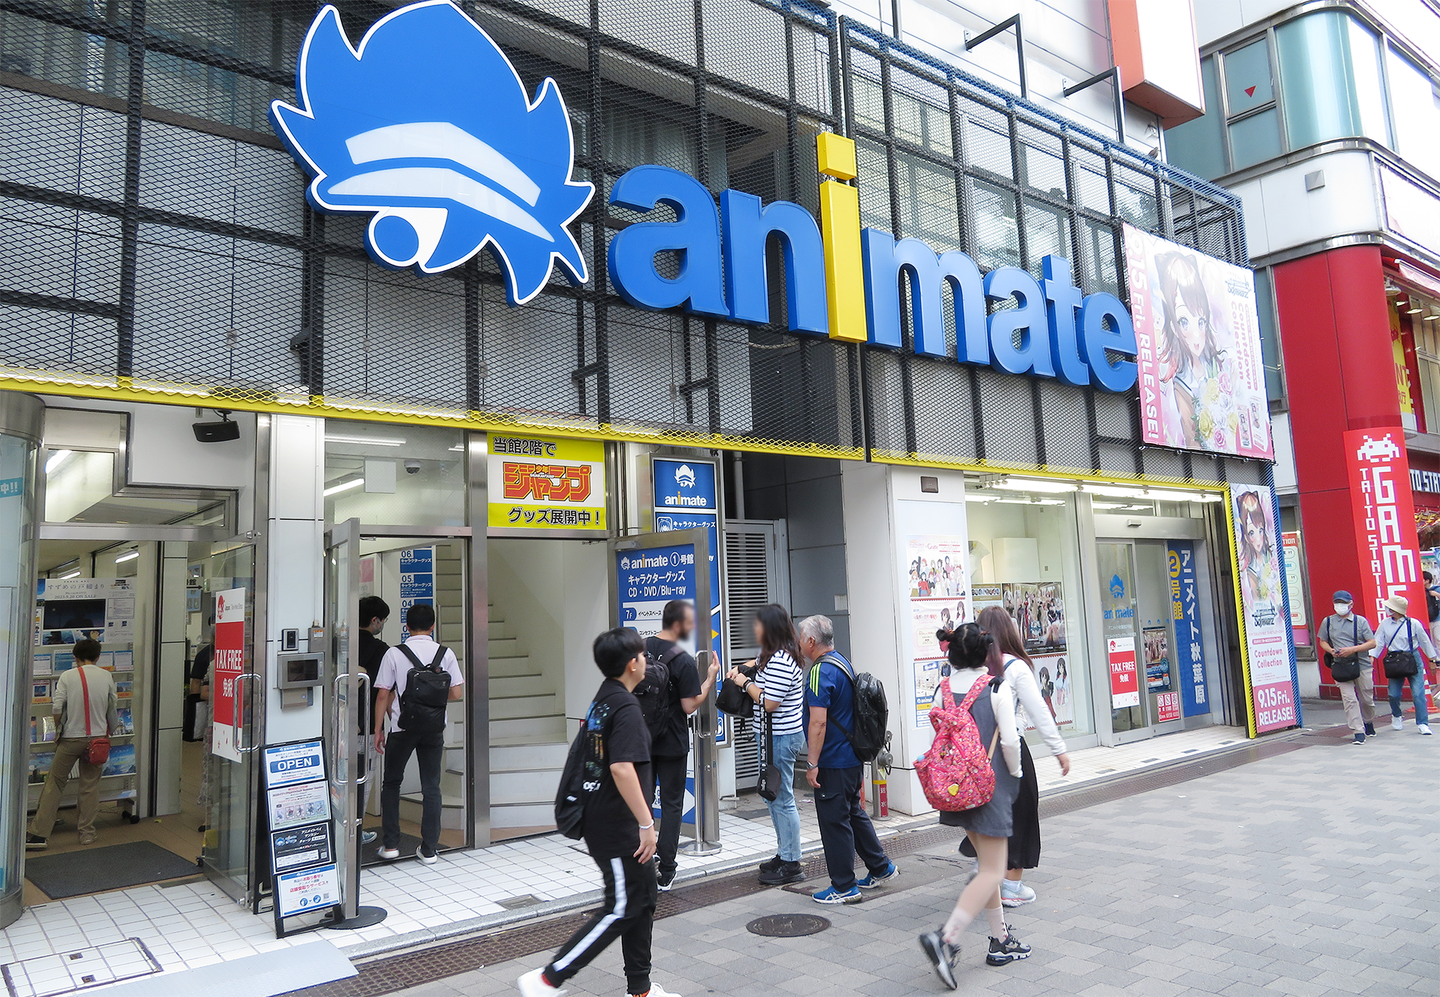 Exterior images of an Animate store in Tokyo